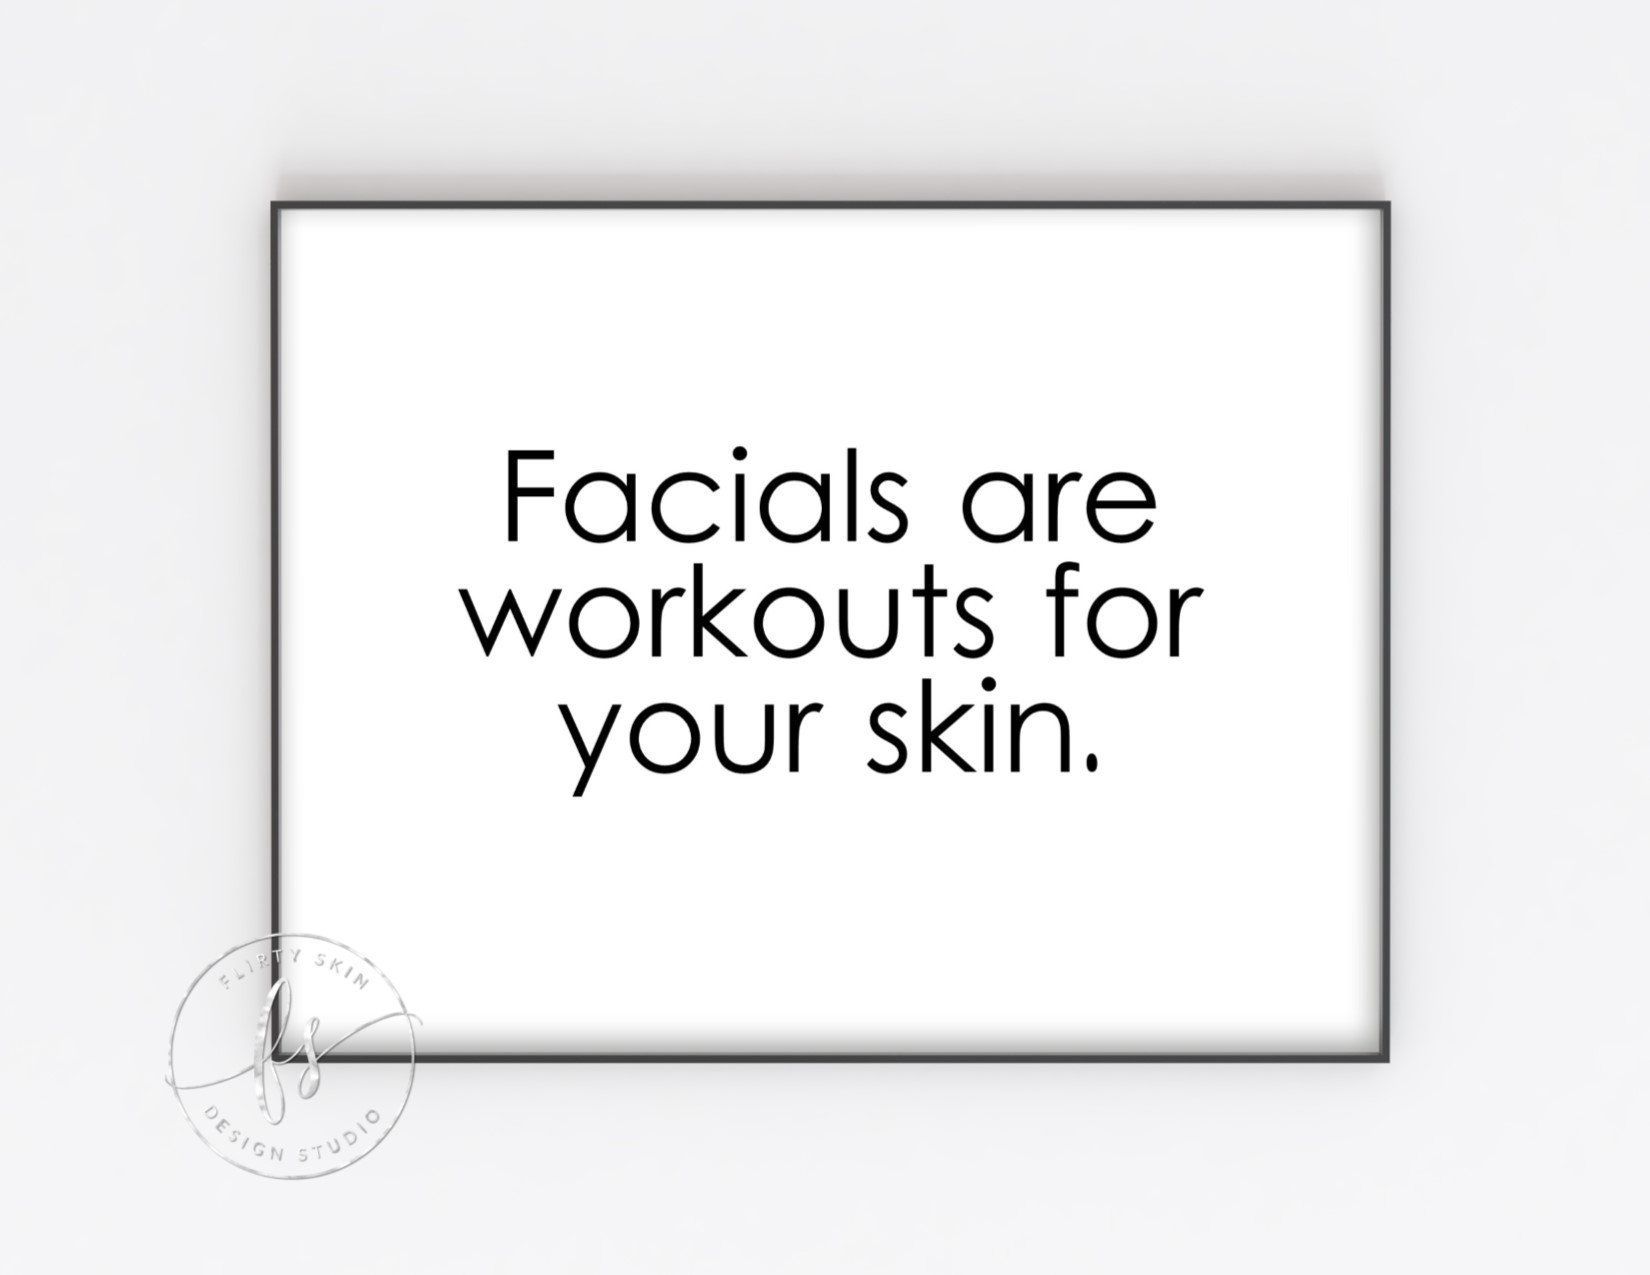 Facials are workouts for your skin  Skin Care Quote  | Etsy -   15 skin care Quotes funny ideas